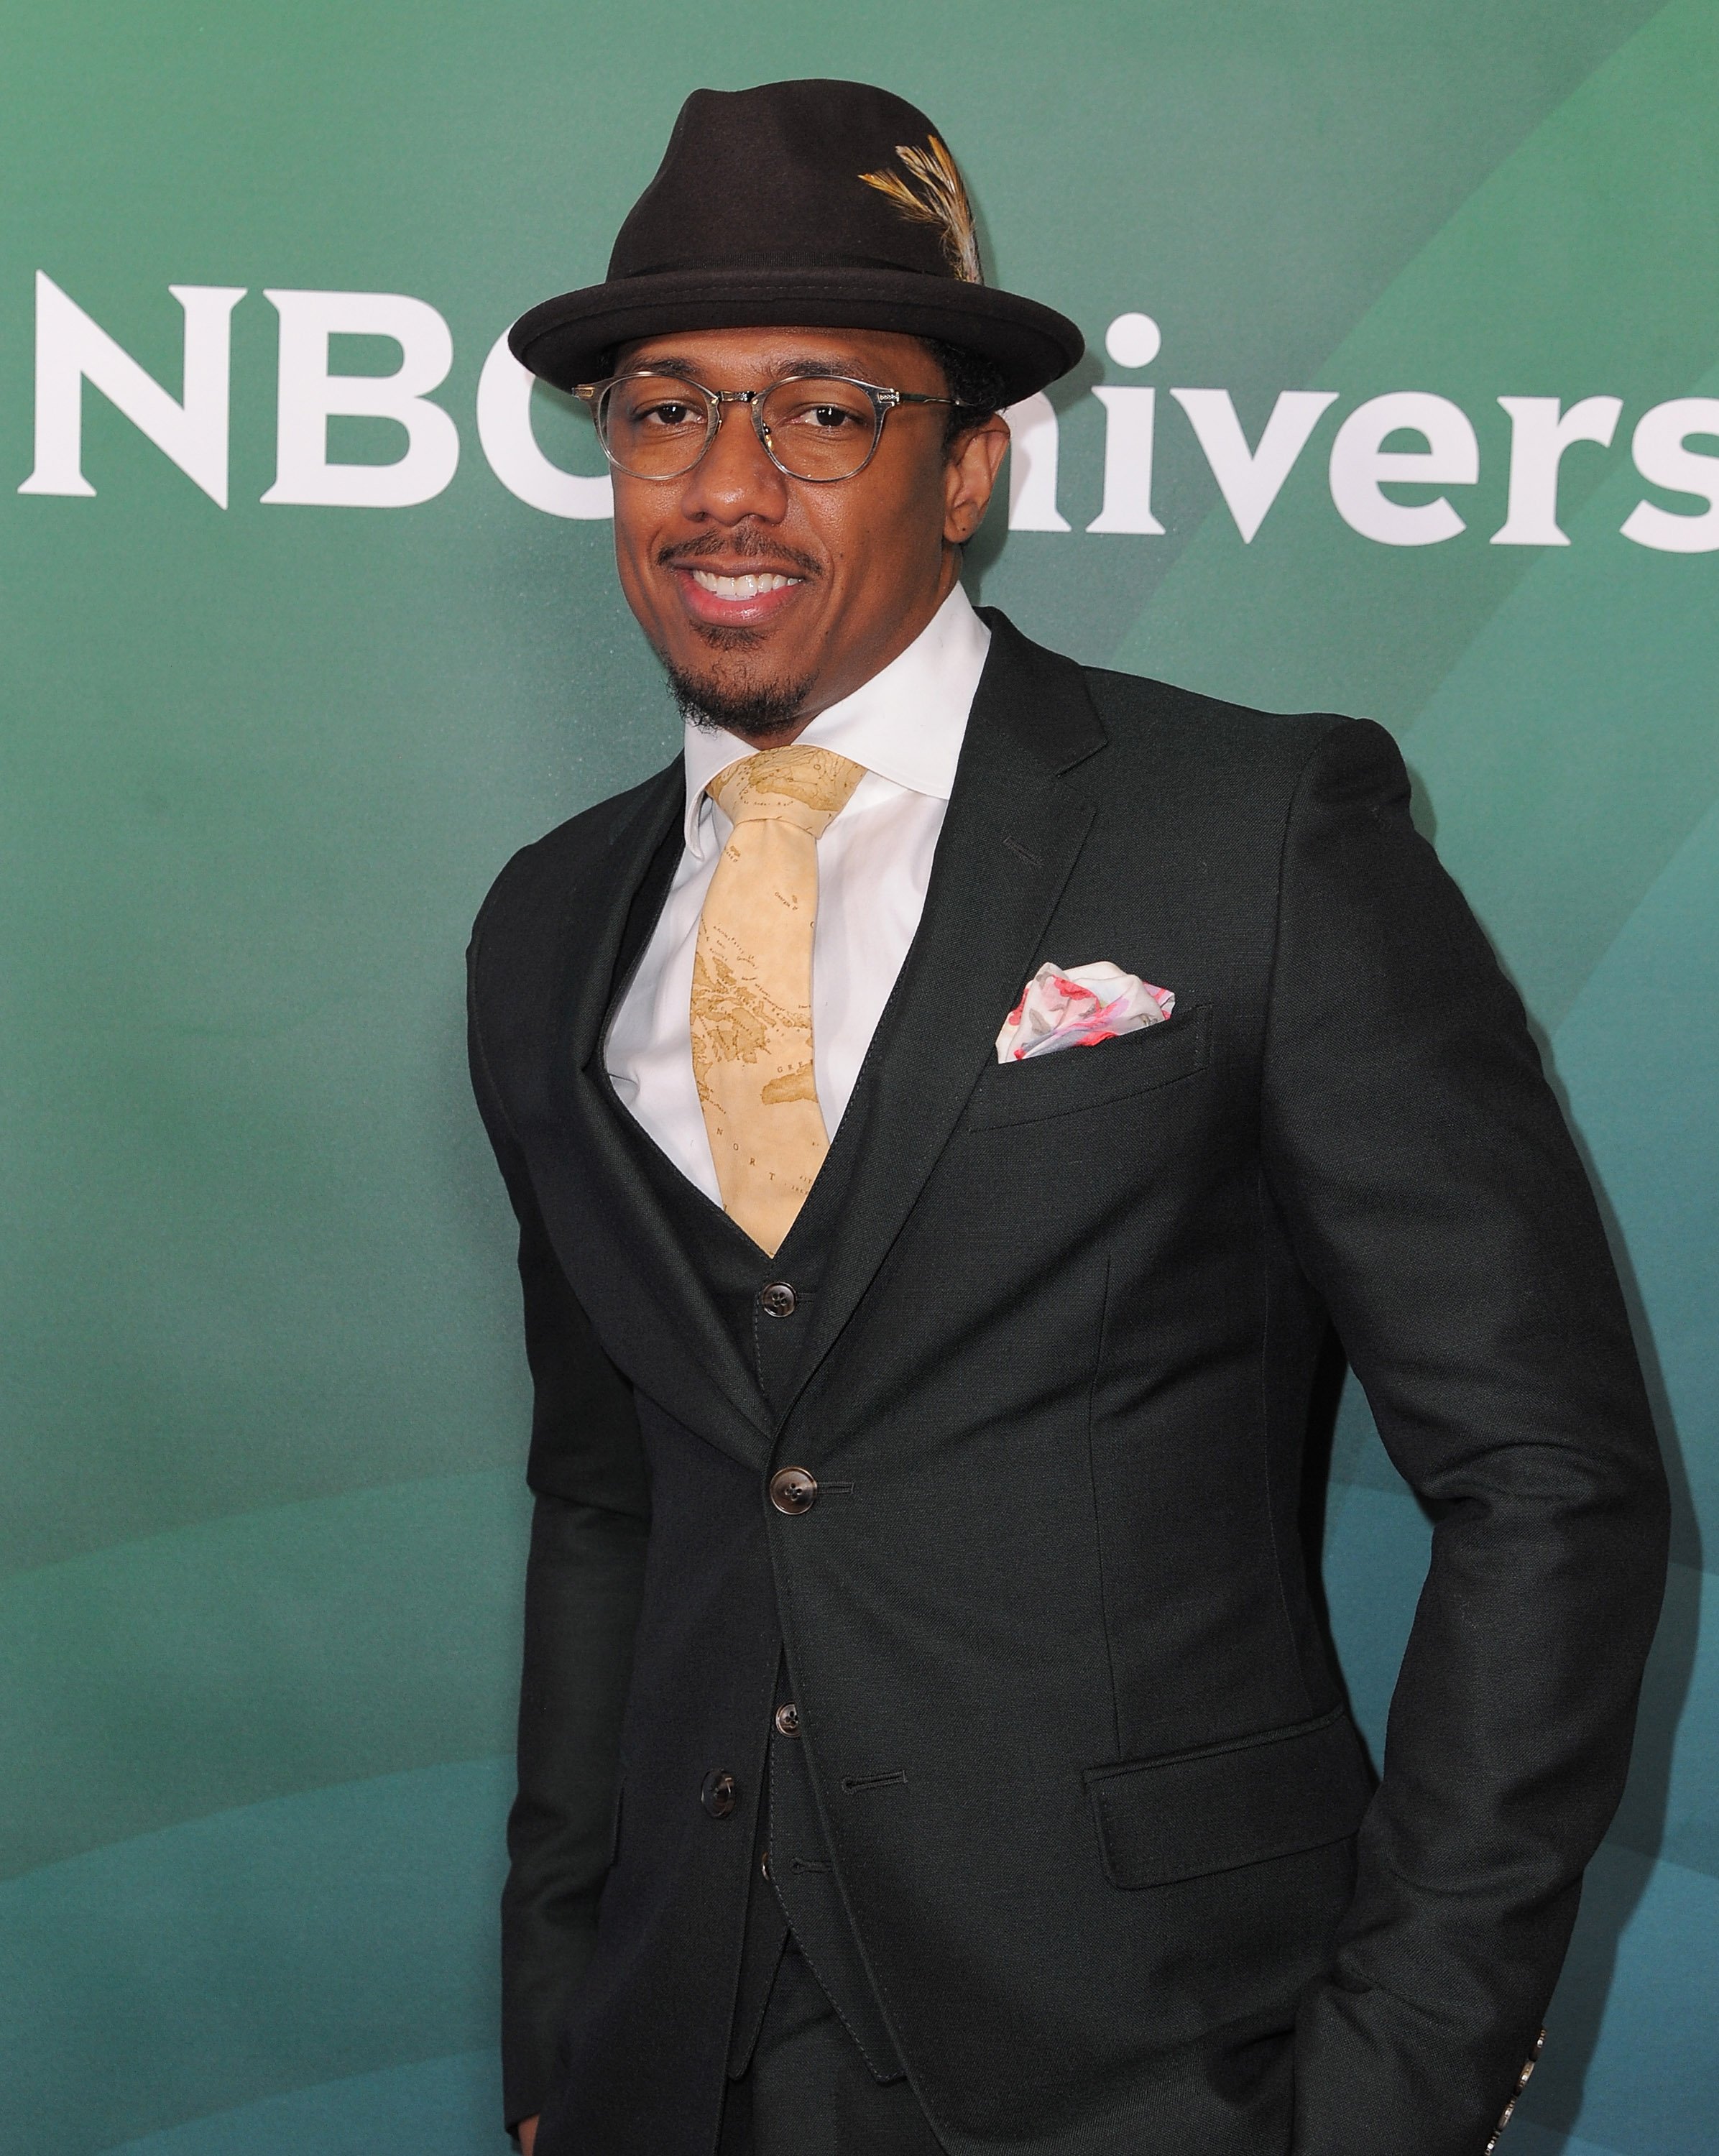 Nick Cannon at the 2016 Winter TCA Tour in California. | Photo: Getty Images